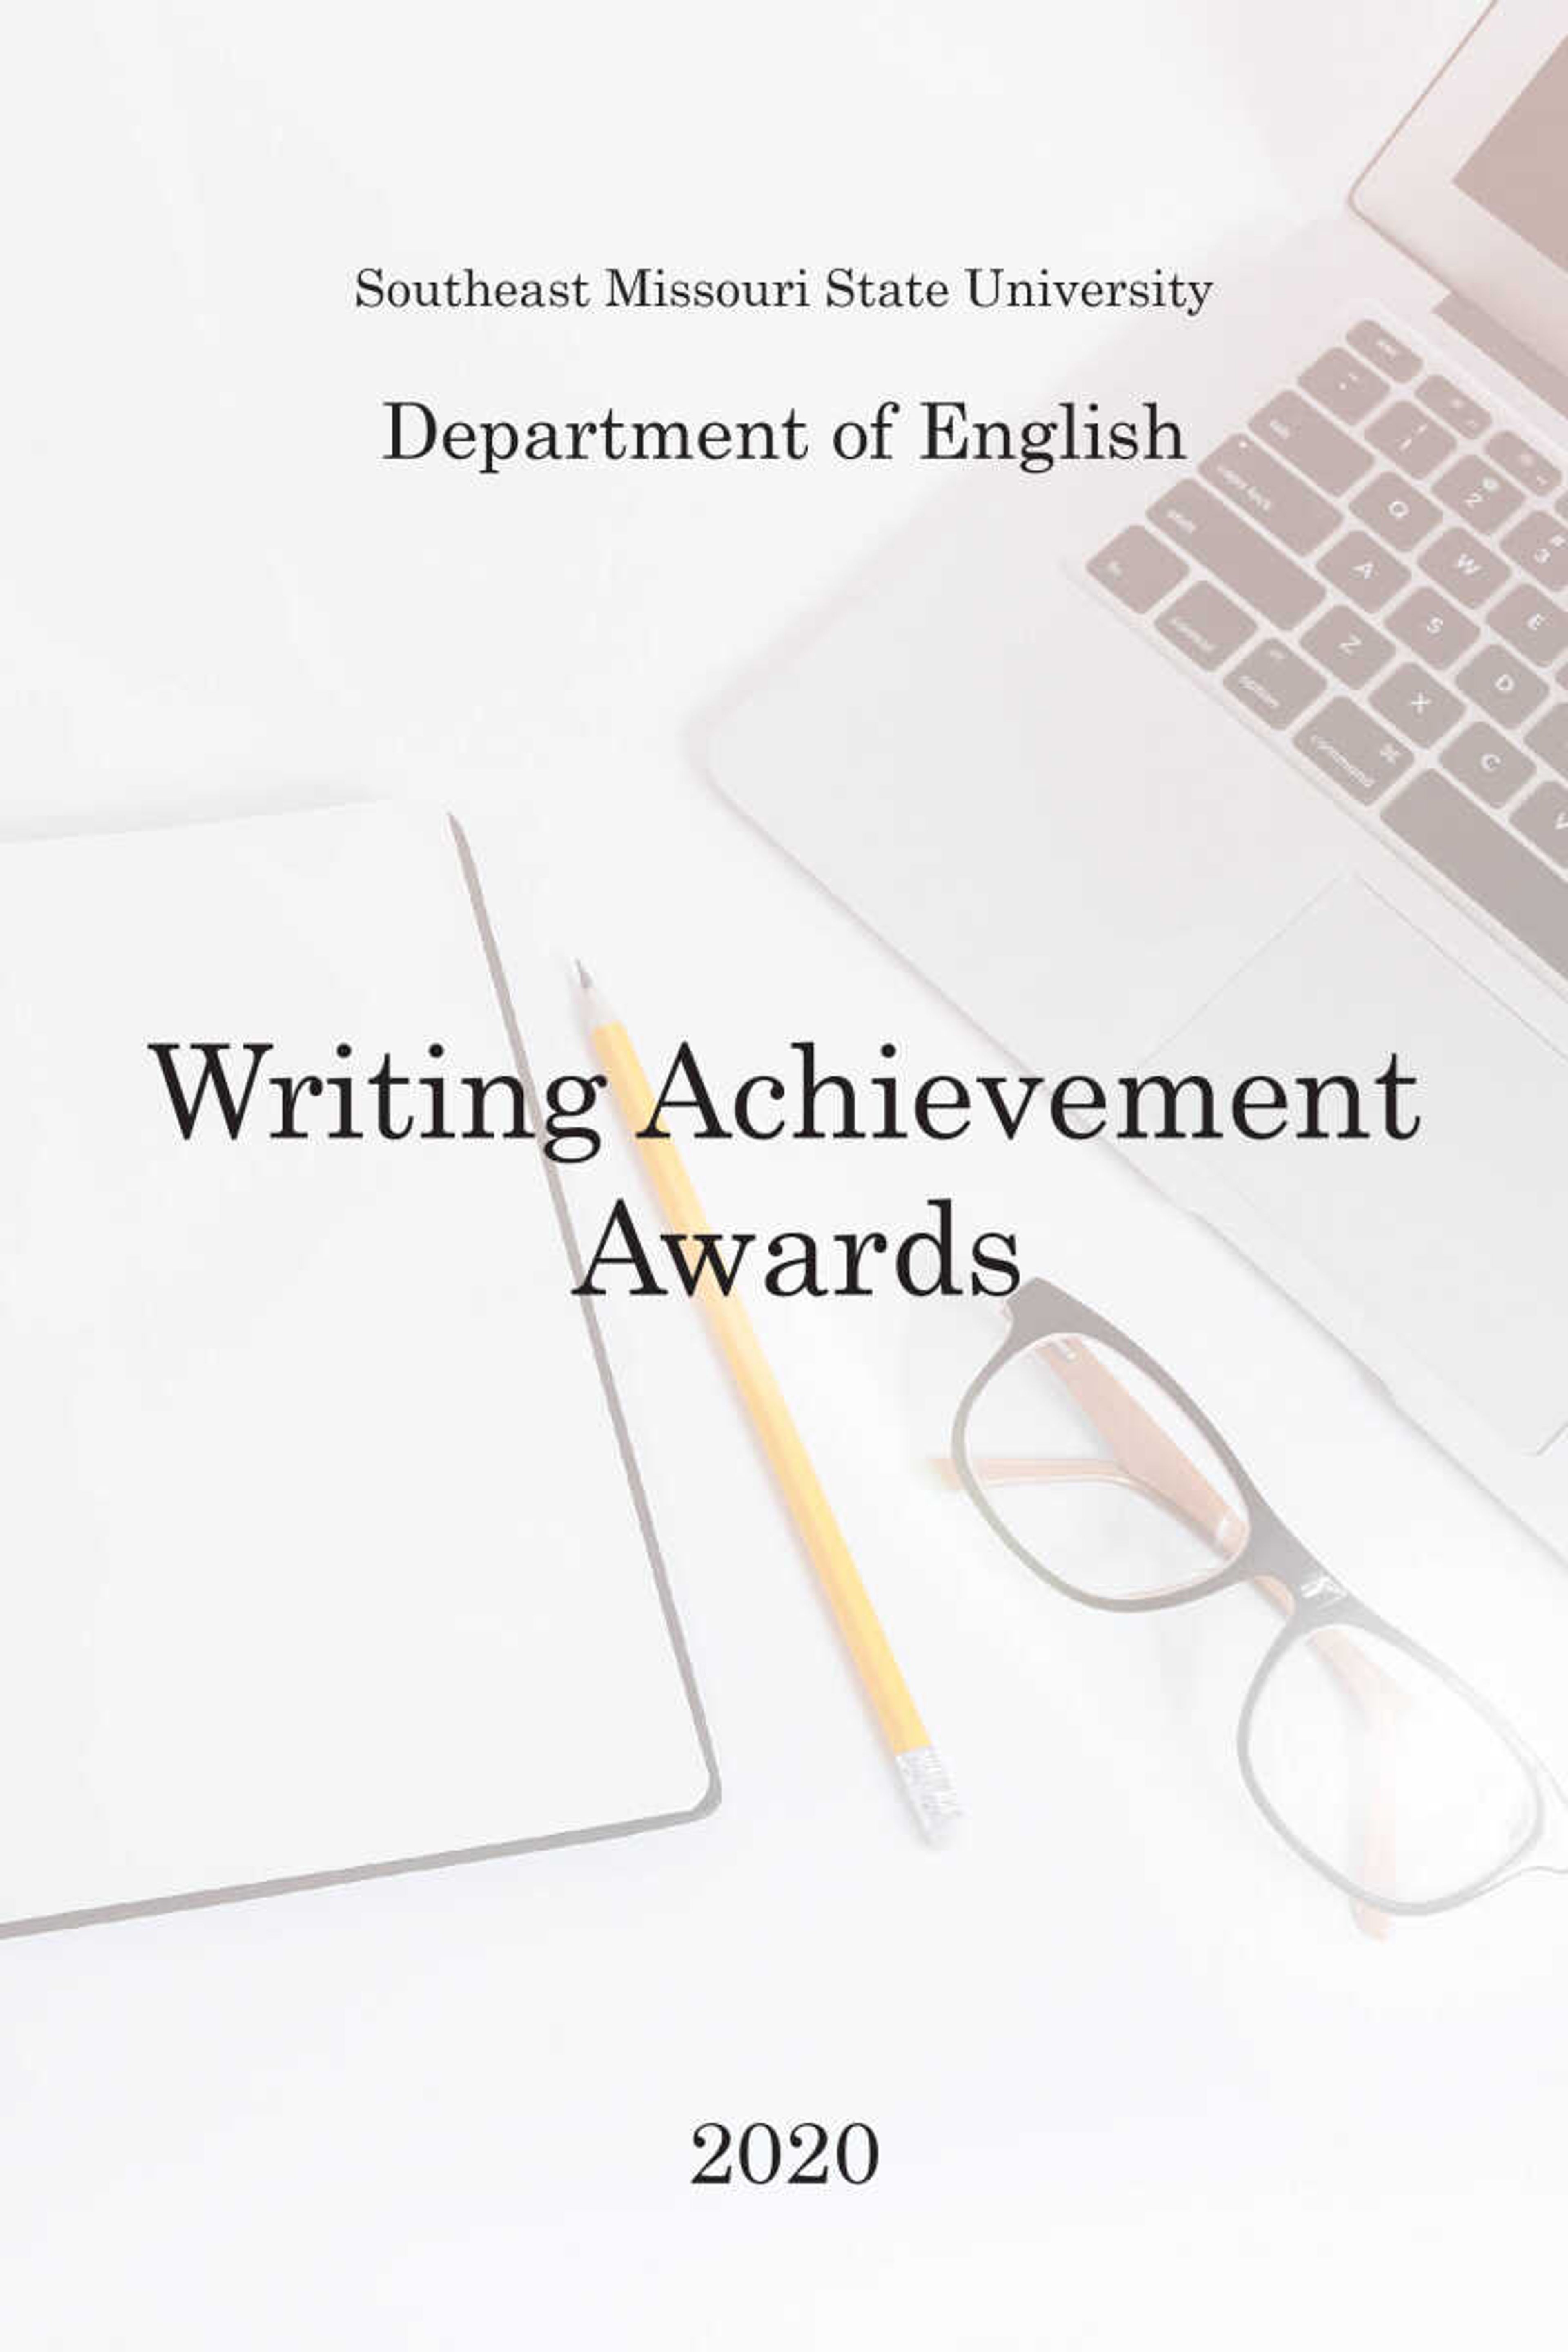 English department contest recognizes writing skills in young students